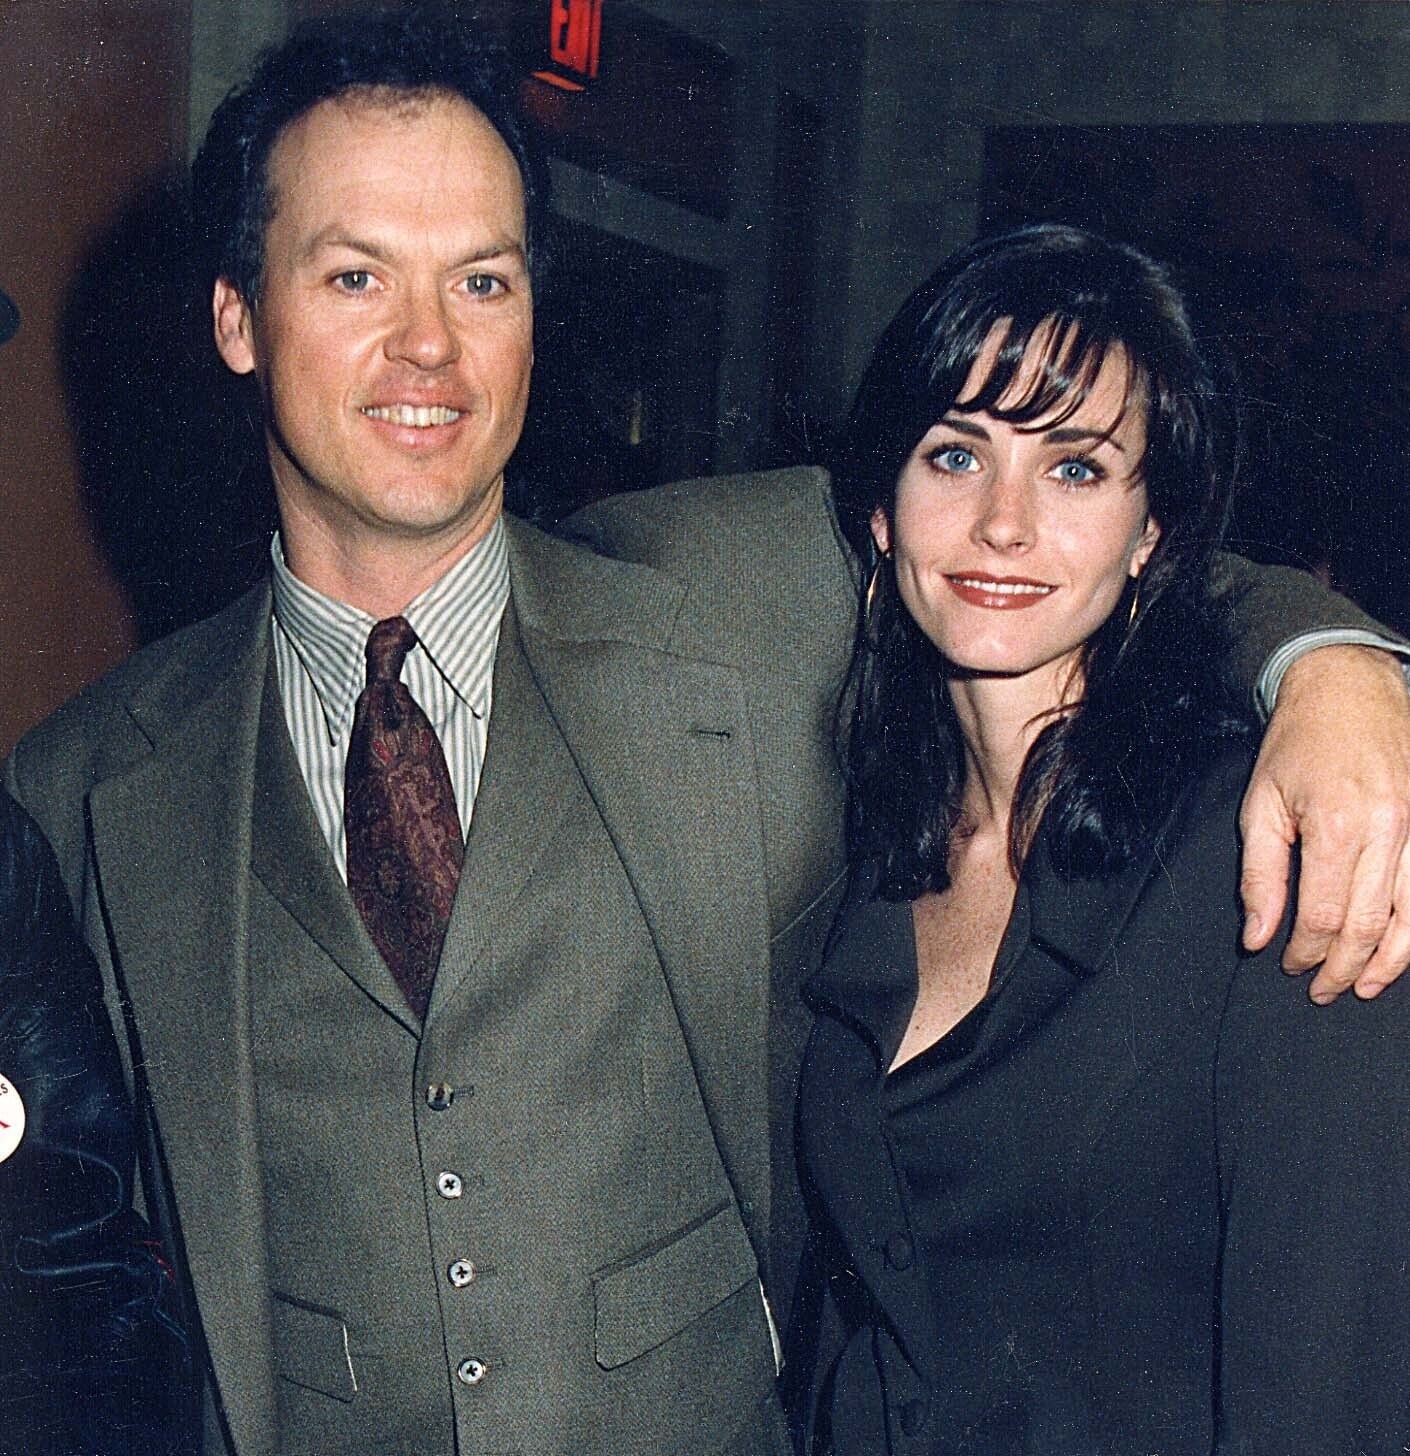 Photo of Courteney Cox and Michael Keaton smiling in suits